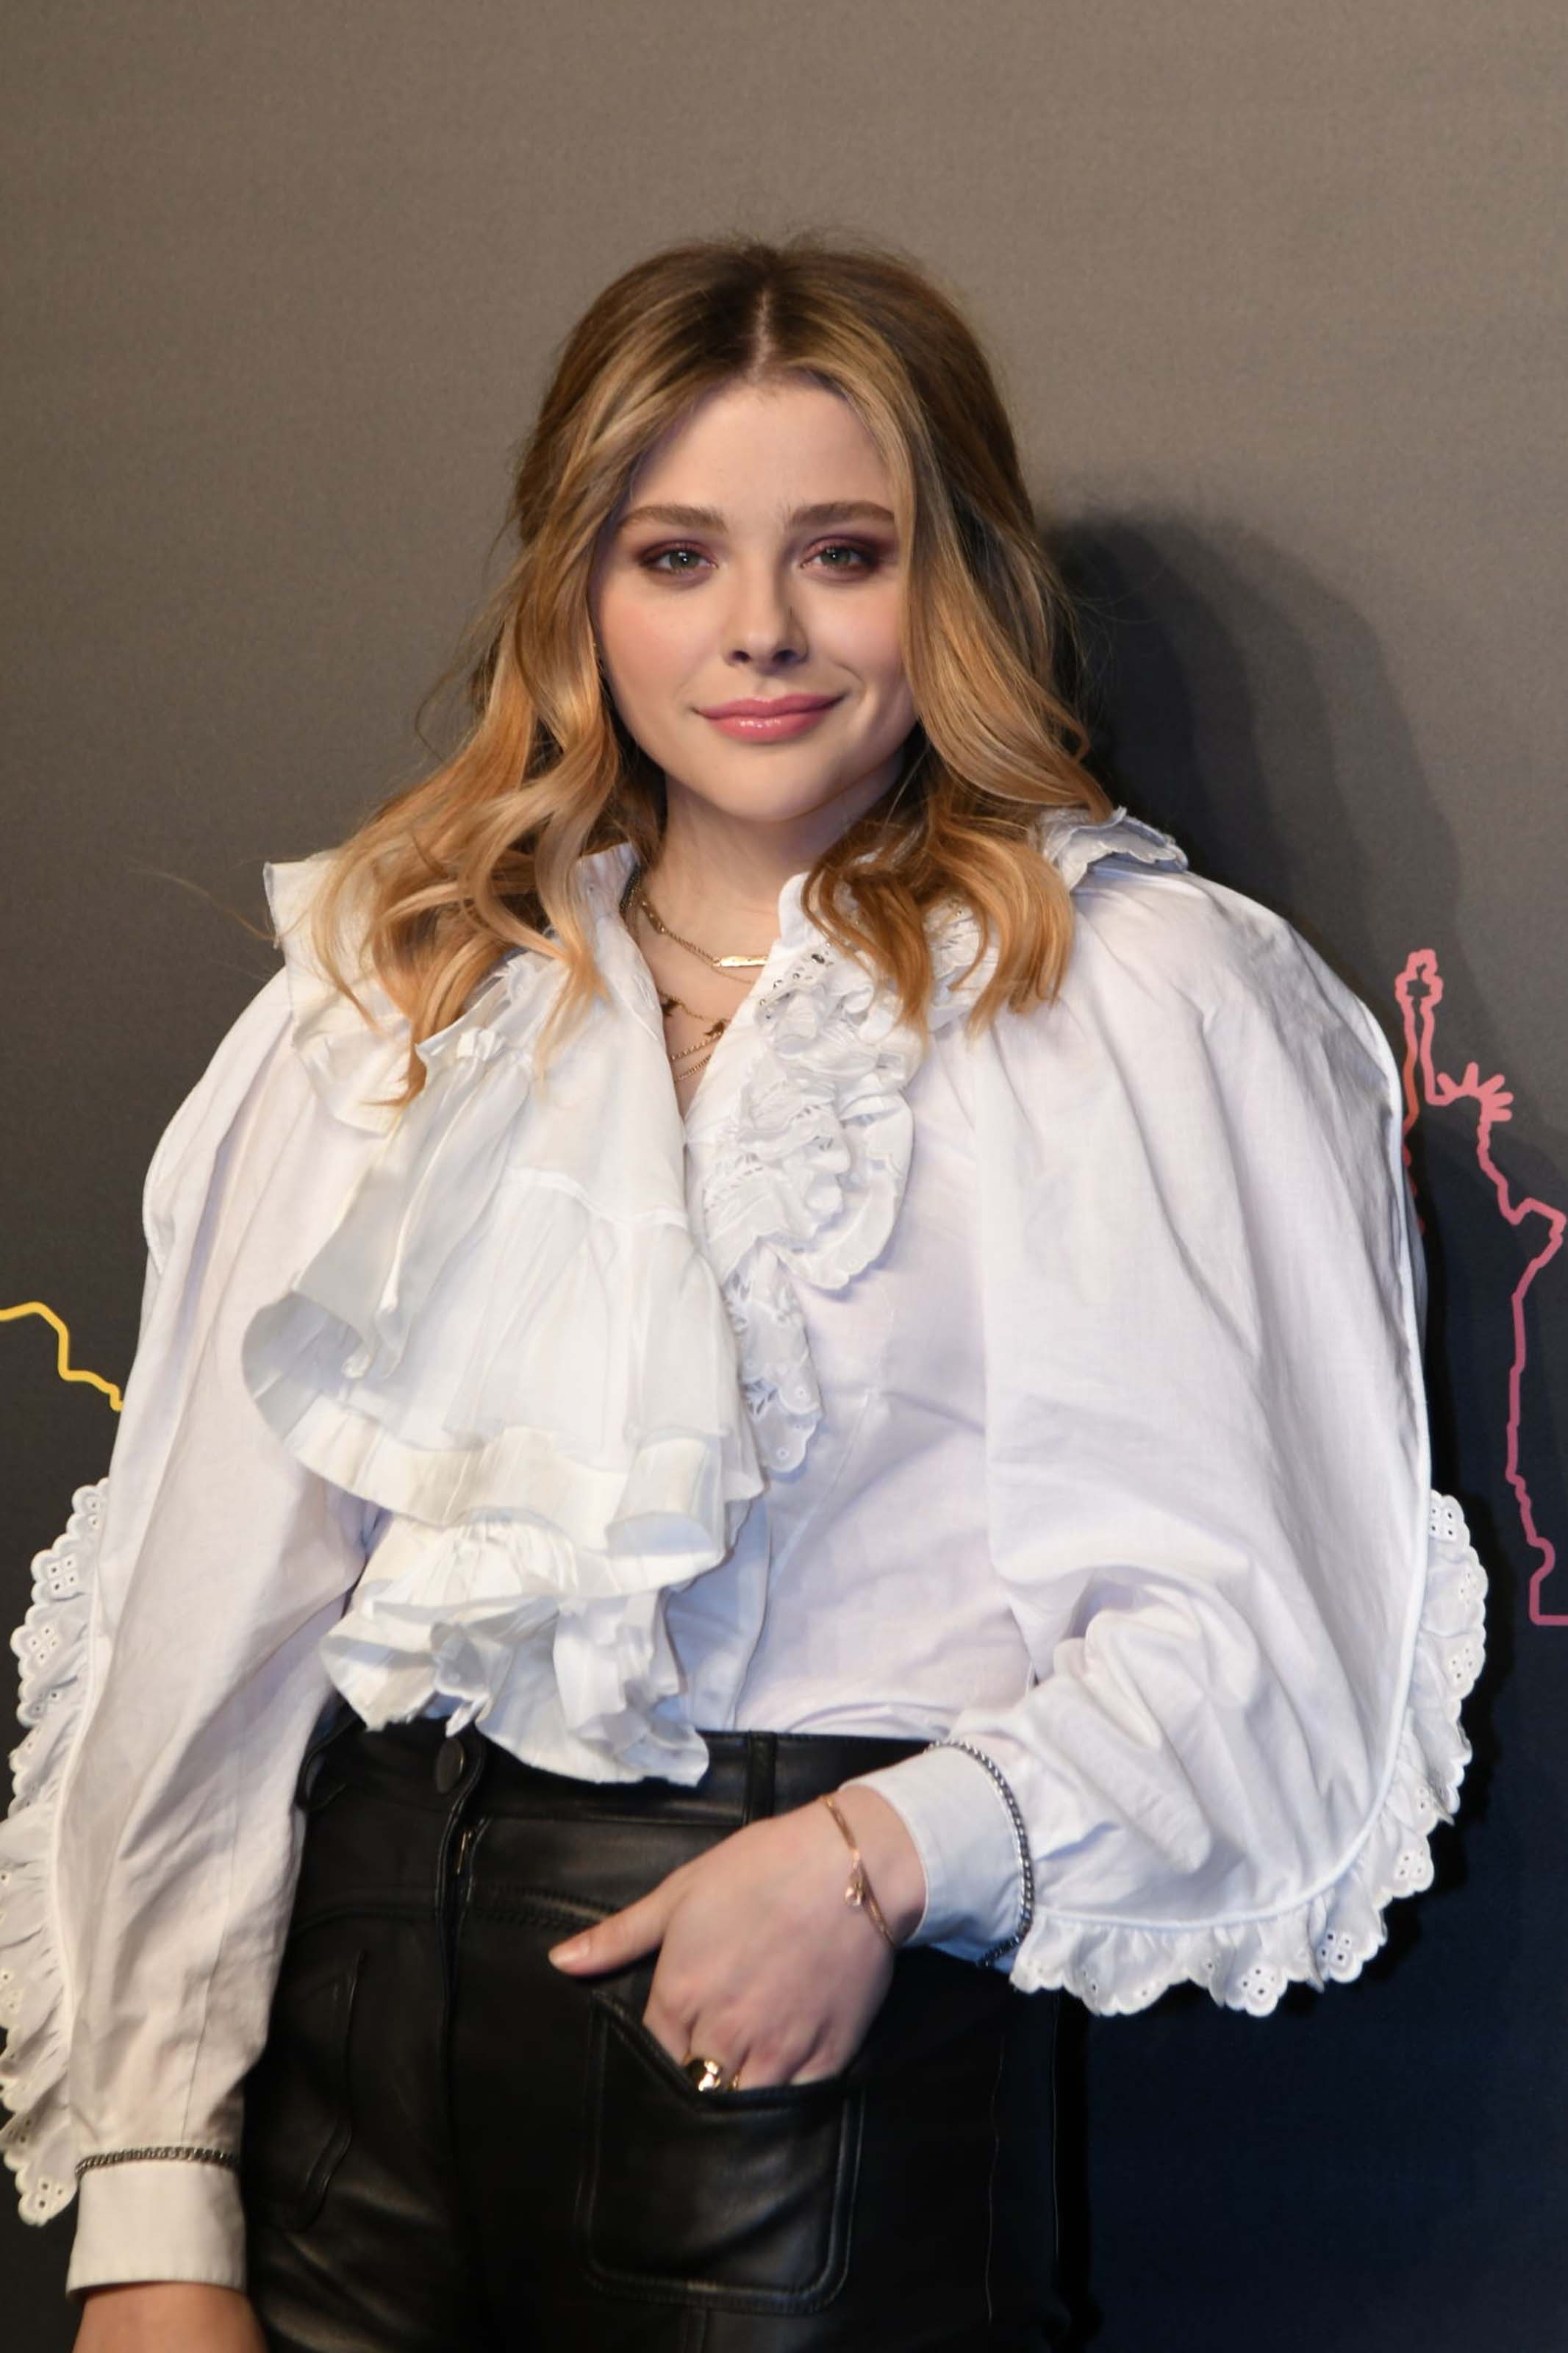 Chloe Moretz attends Coach 2019 Early Autumn Collection Fashion Show